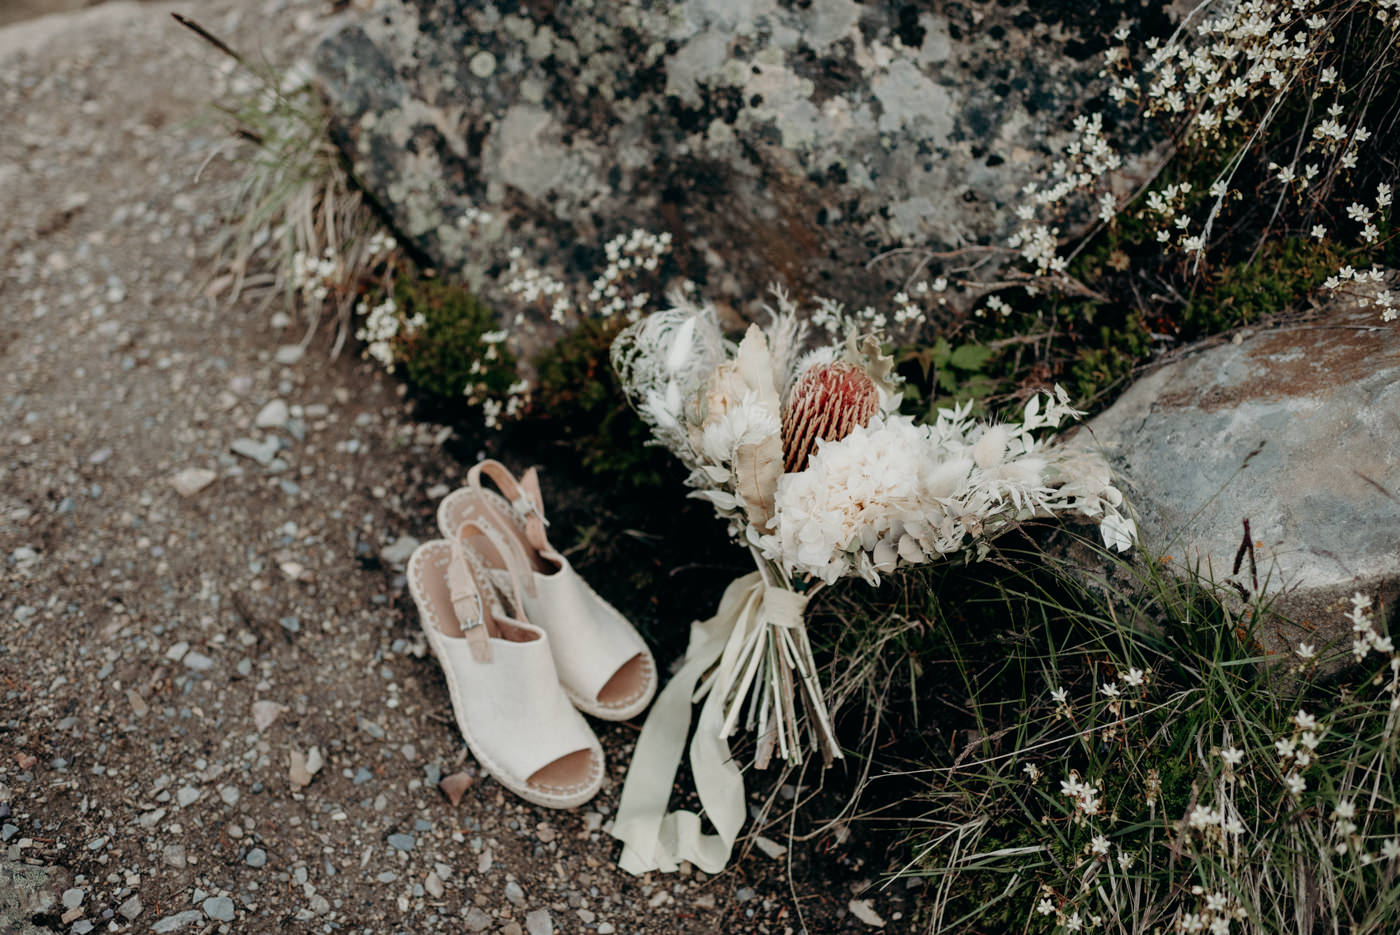 shoes and bouquet on the ground